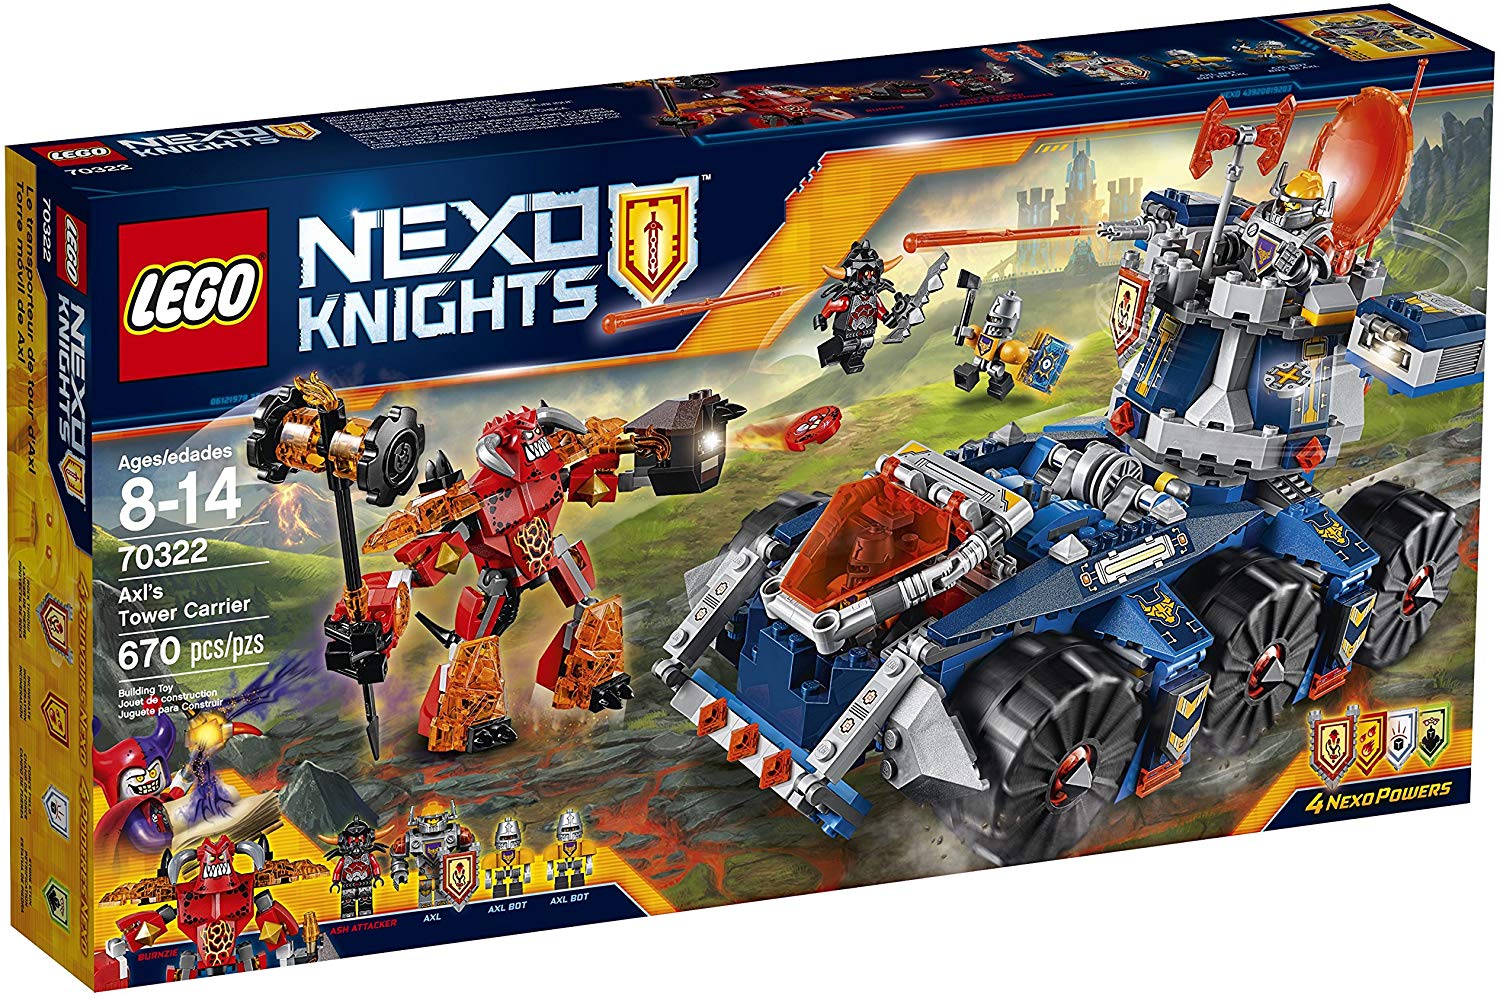 LEGO NEXO KNIGHTS Axl's Tower Carrier, 70322 - image 1 of 6